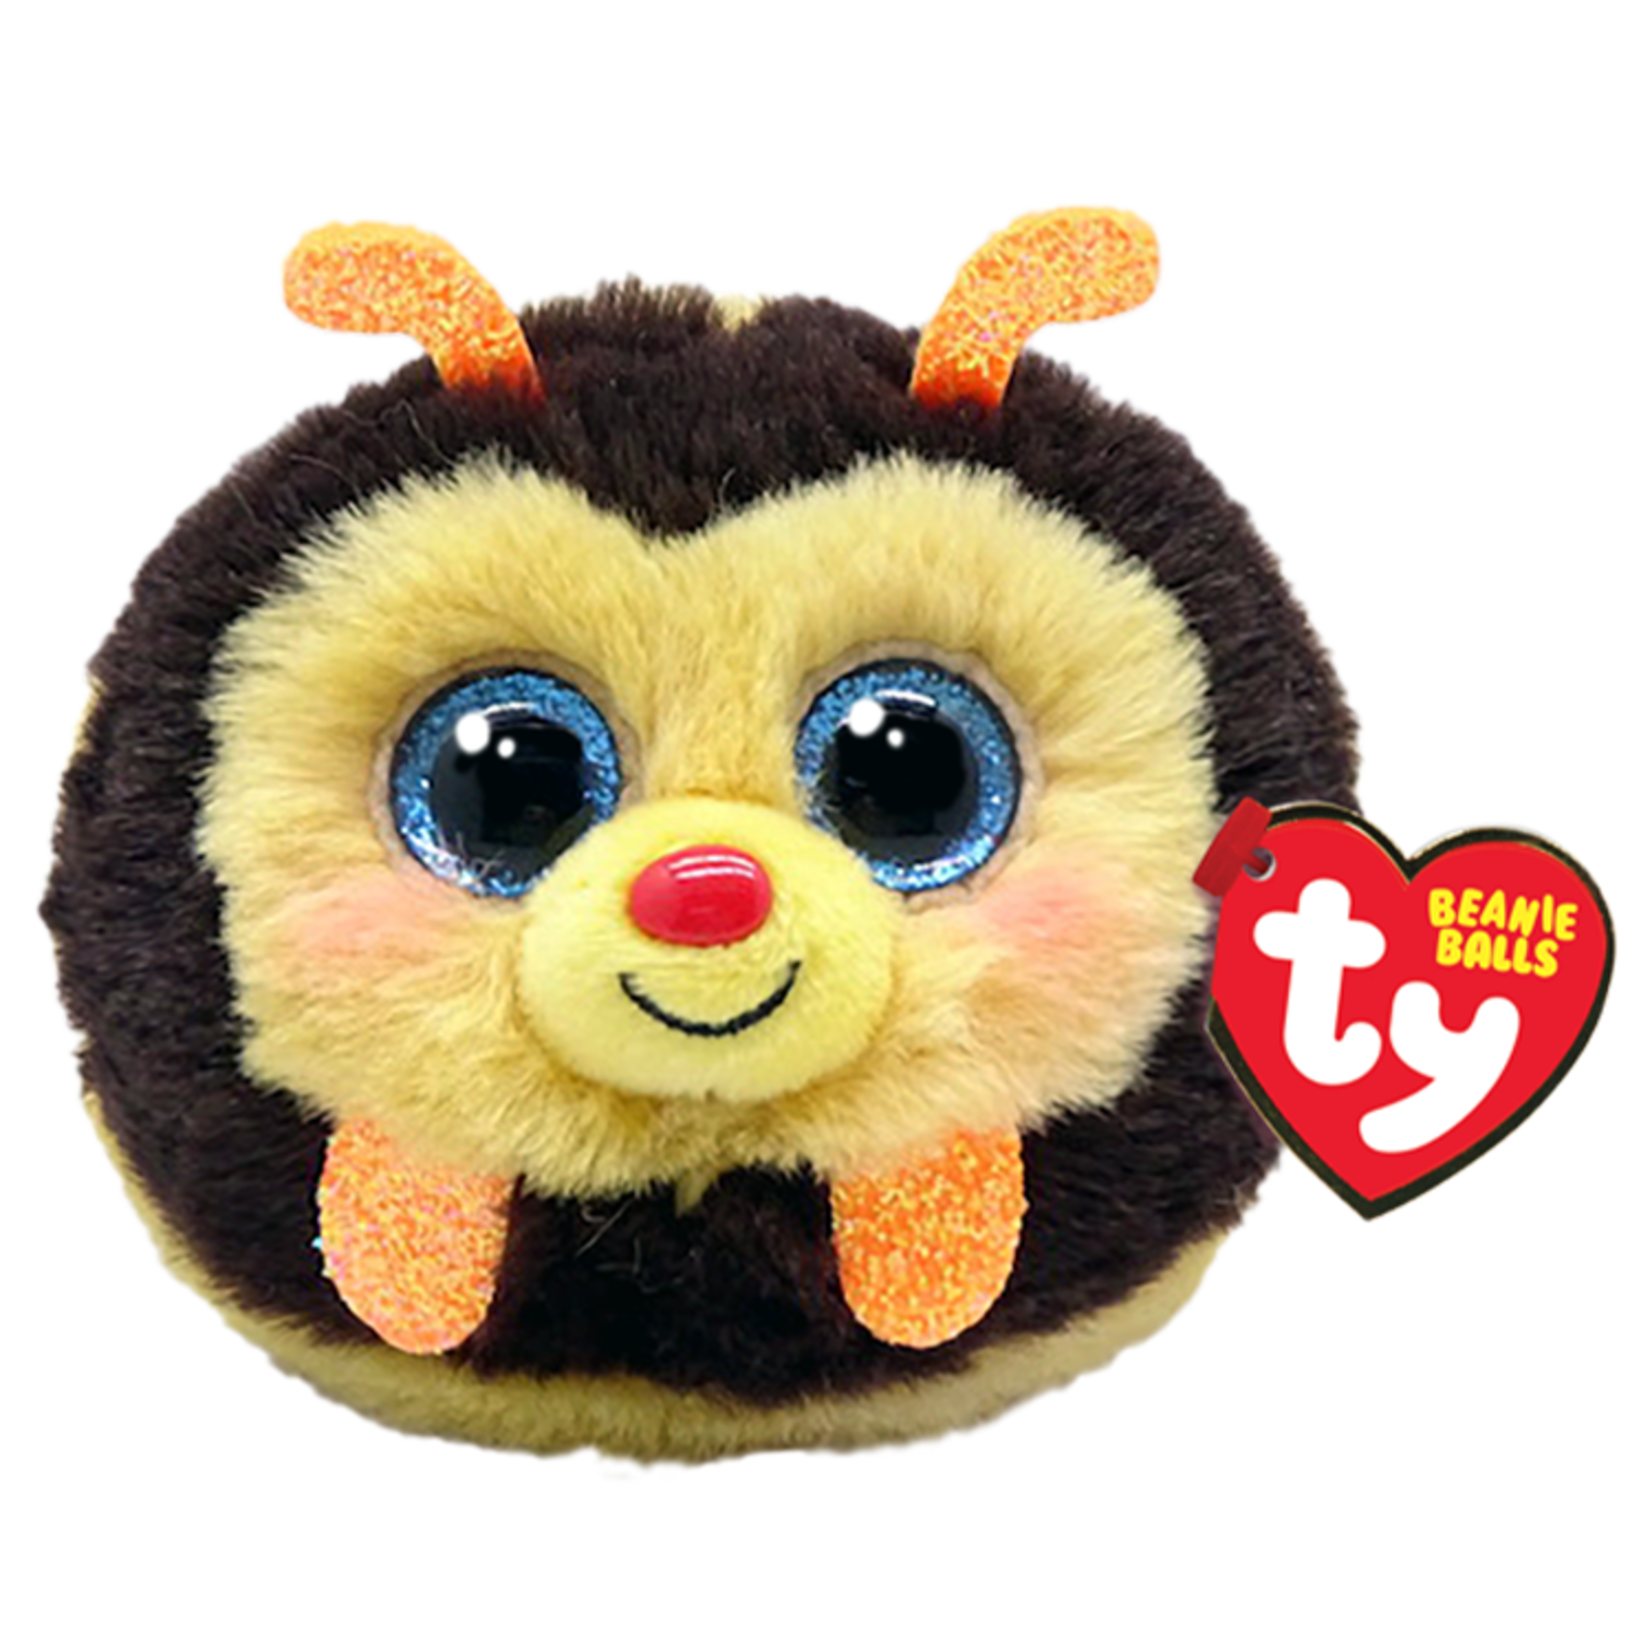 TY TY Zinger Bumble Bee Beanie Ball